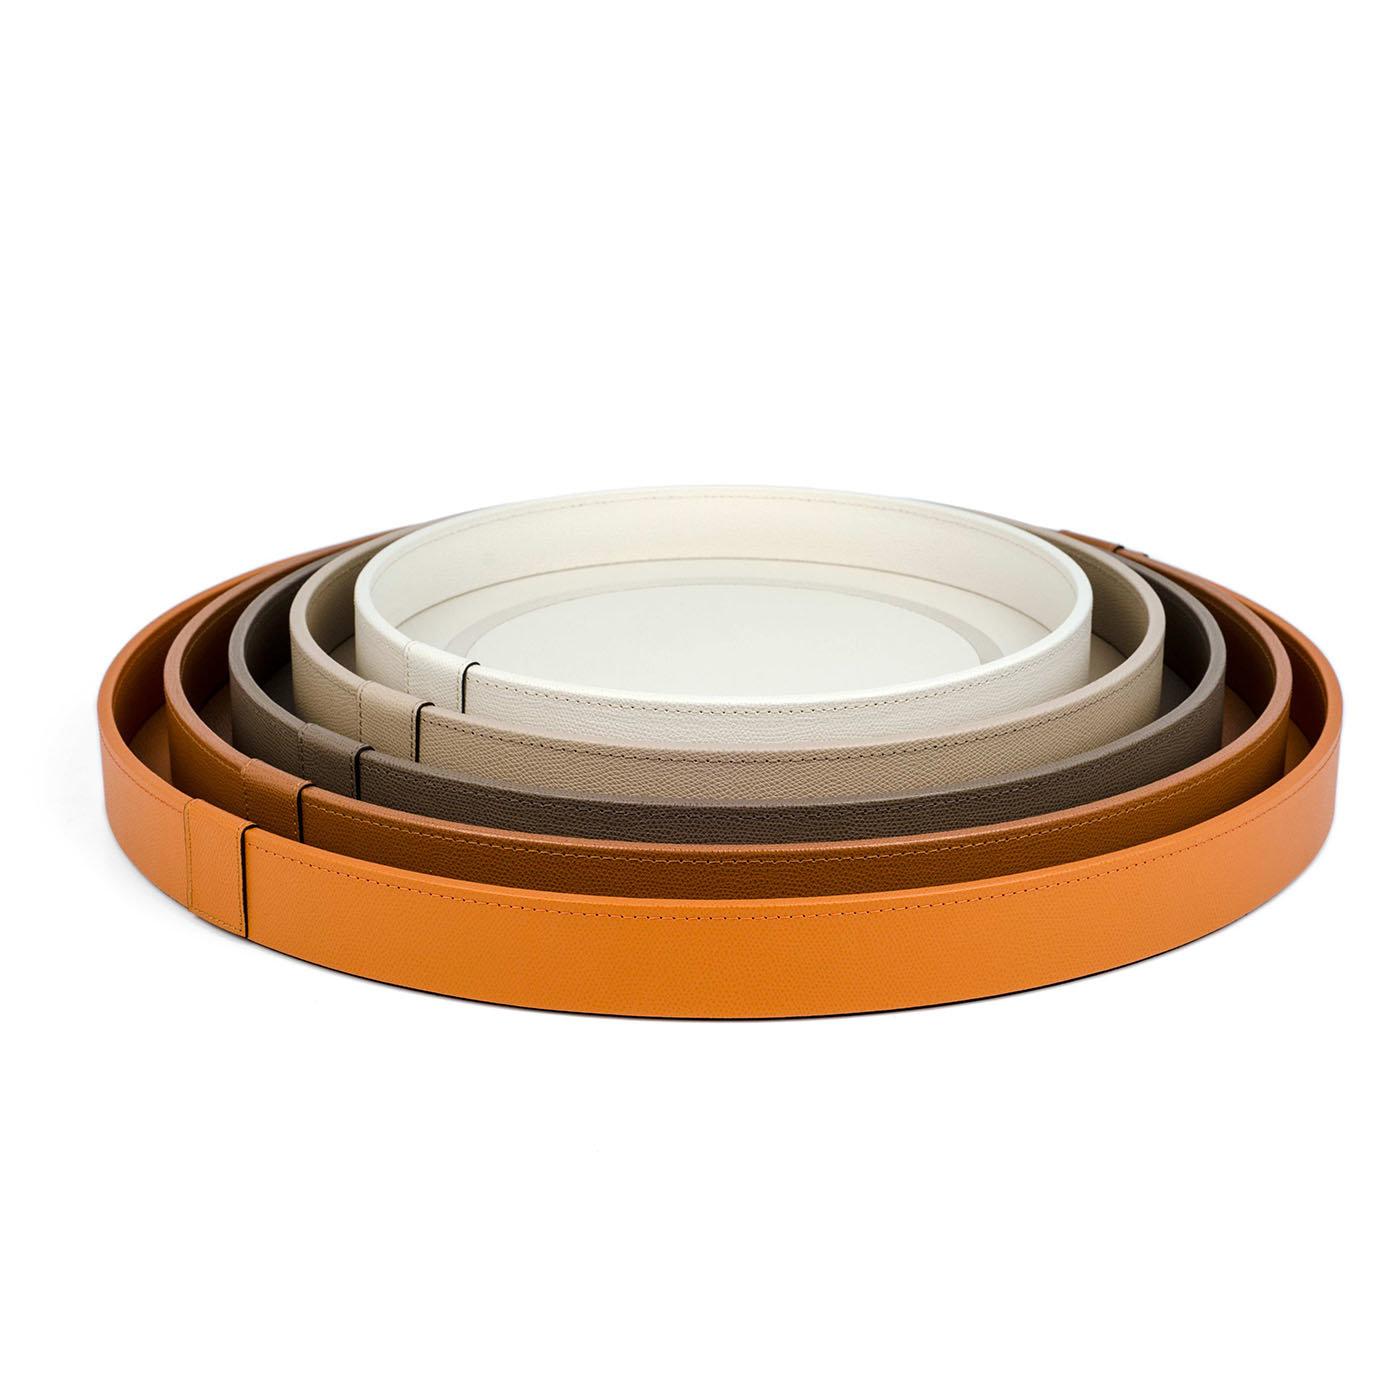 This luxe tray is an exclusive accessory upholstered with orange-dyed calfskin, its solid, opaque shade is only interrupted by a thin, chromed circle accenting the bottom surface. The round shape, the vivid hue, and the soft grain leather all give